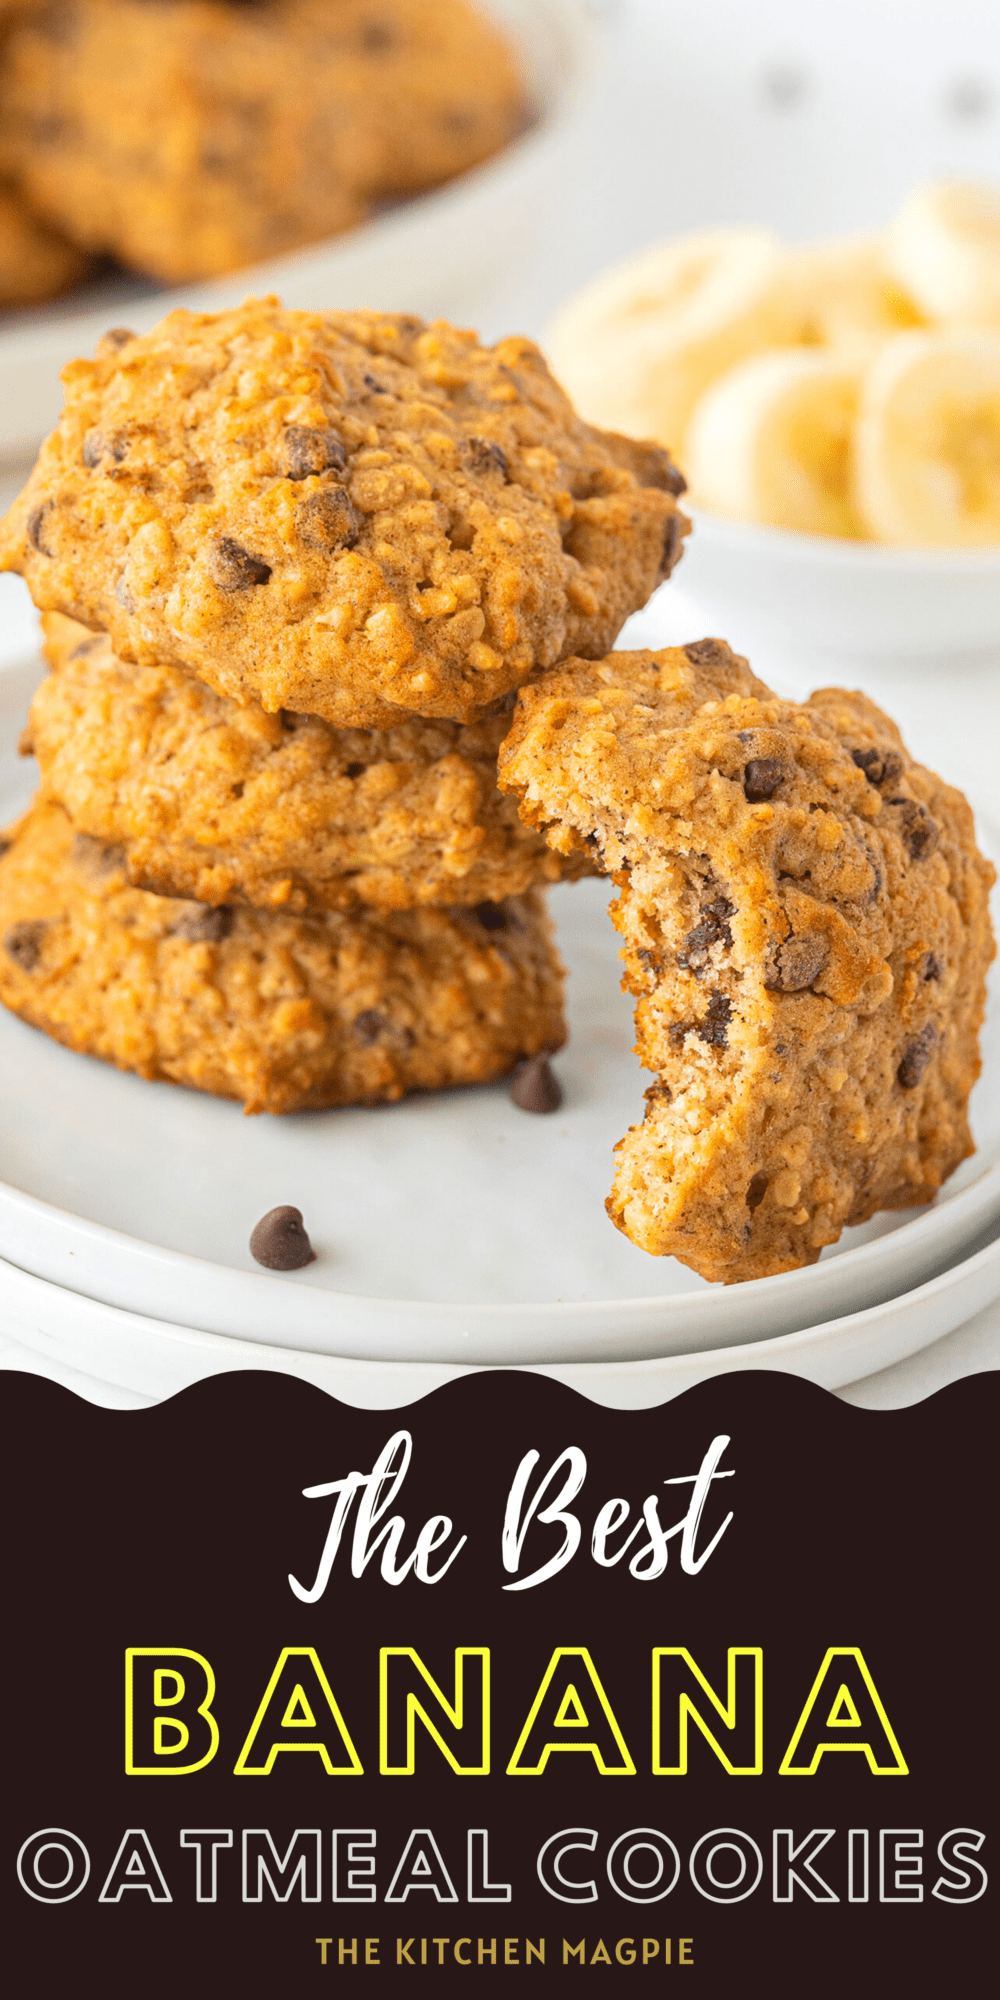  These Banana Oatmeal Cookies are a really old-fashioned recipe that my Grandma used to make! Another great way to use up ripe bananas!